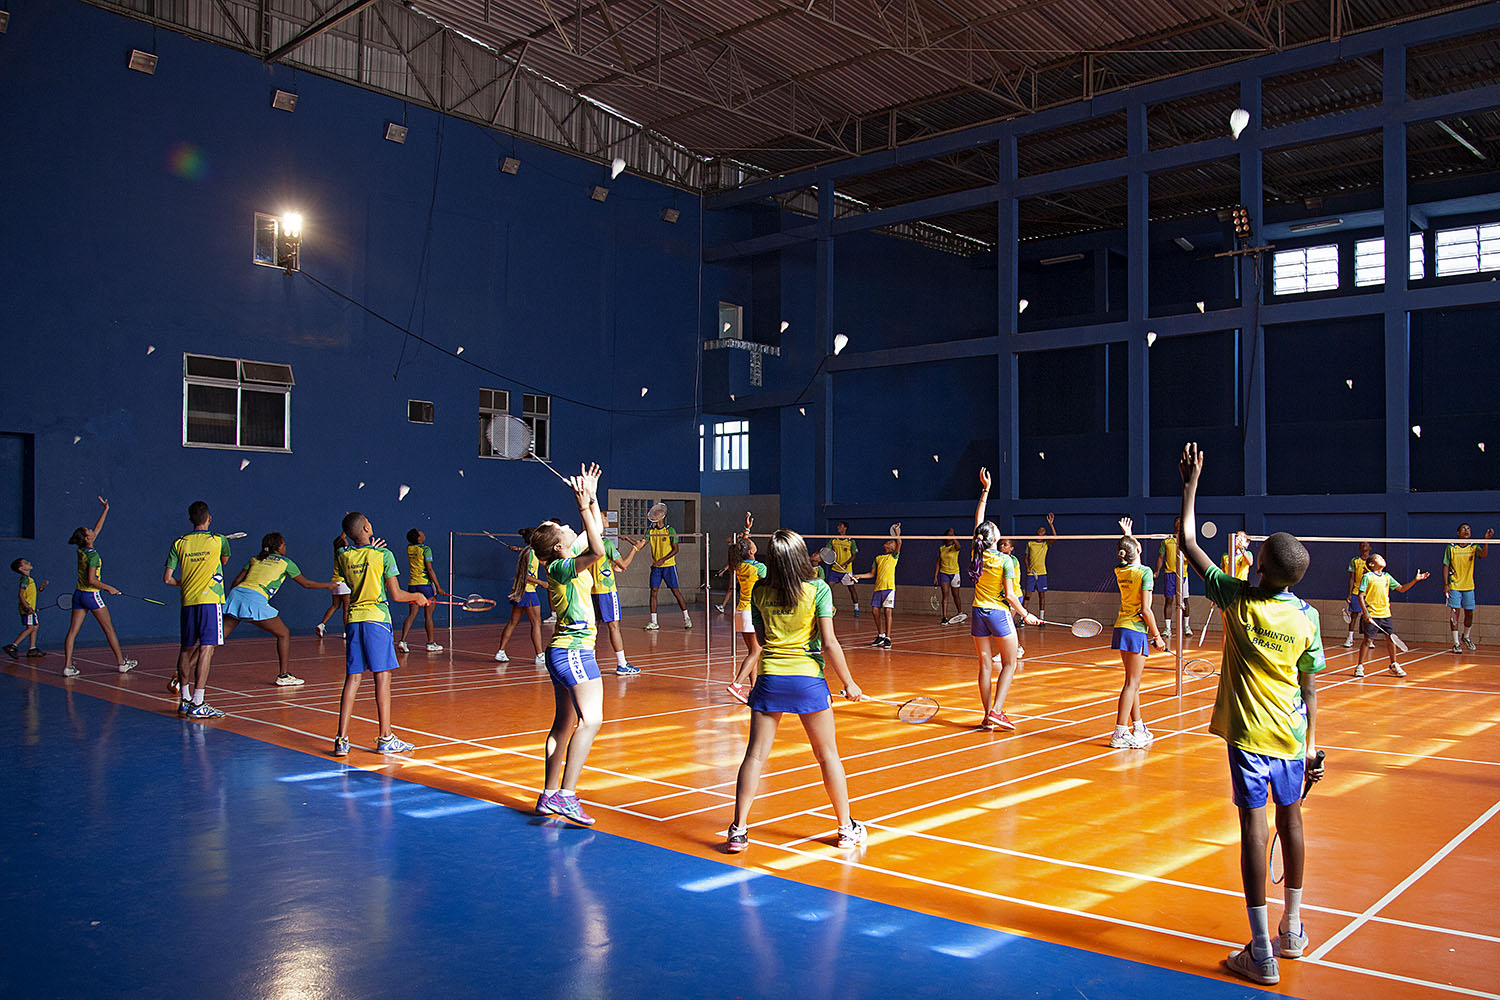 Children at Miratus train for badminton tournaments using techniques developed from samba dancing.